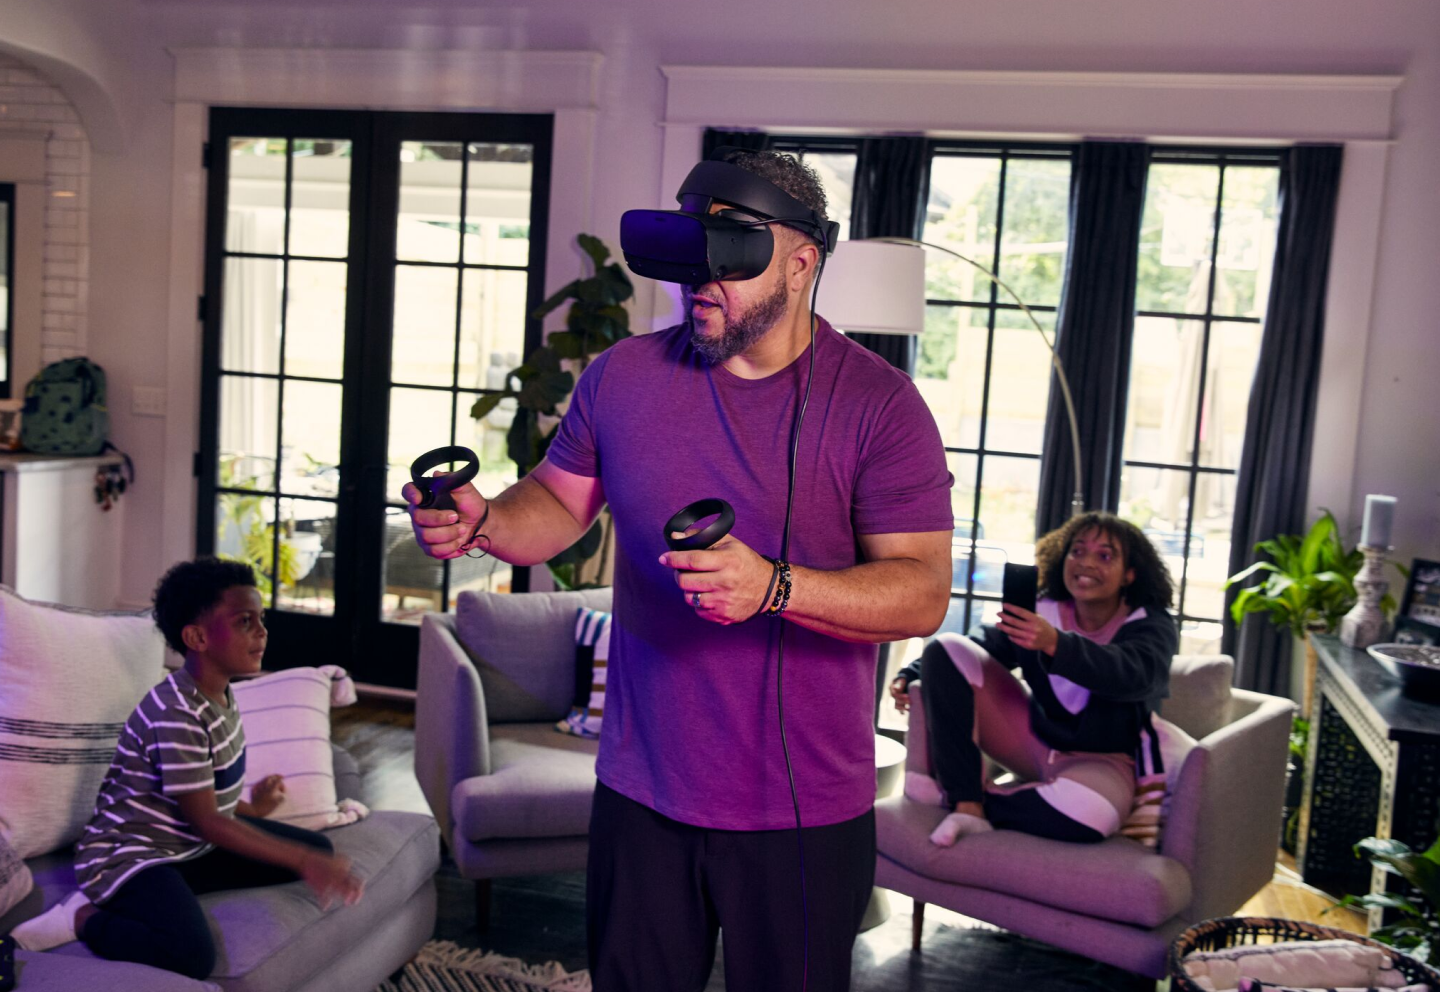 Man using VR headset while the kids watch